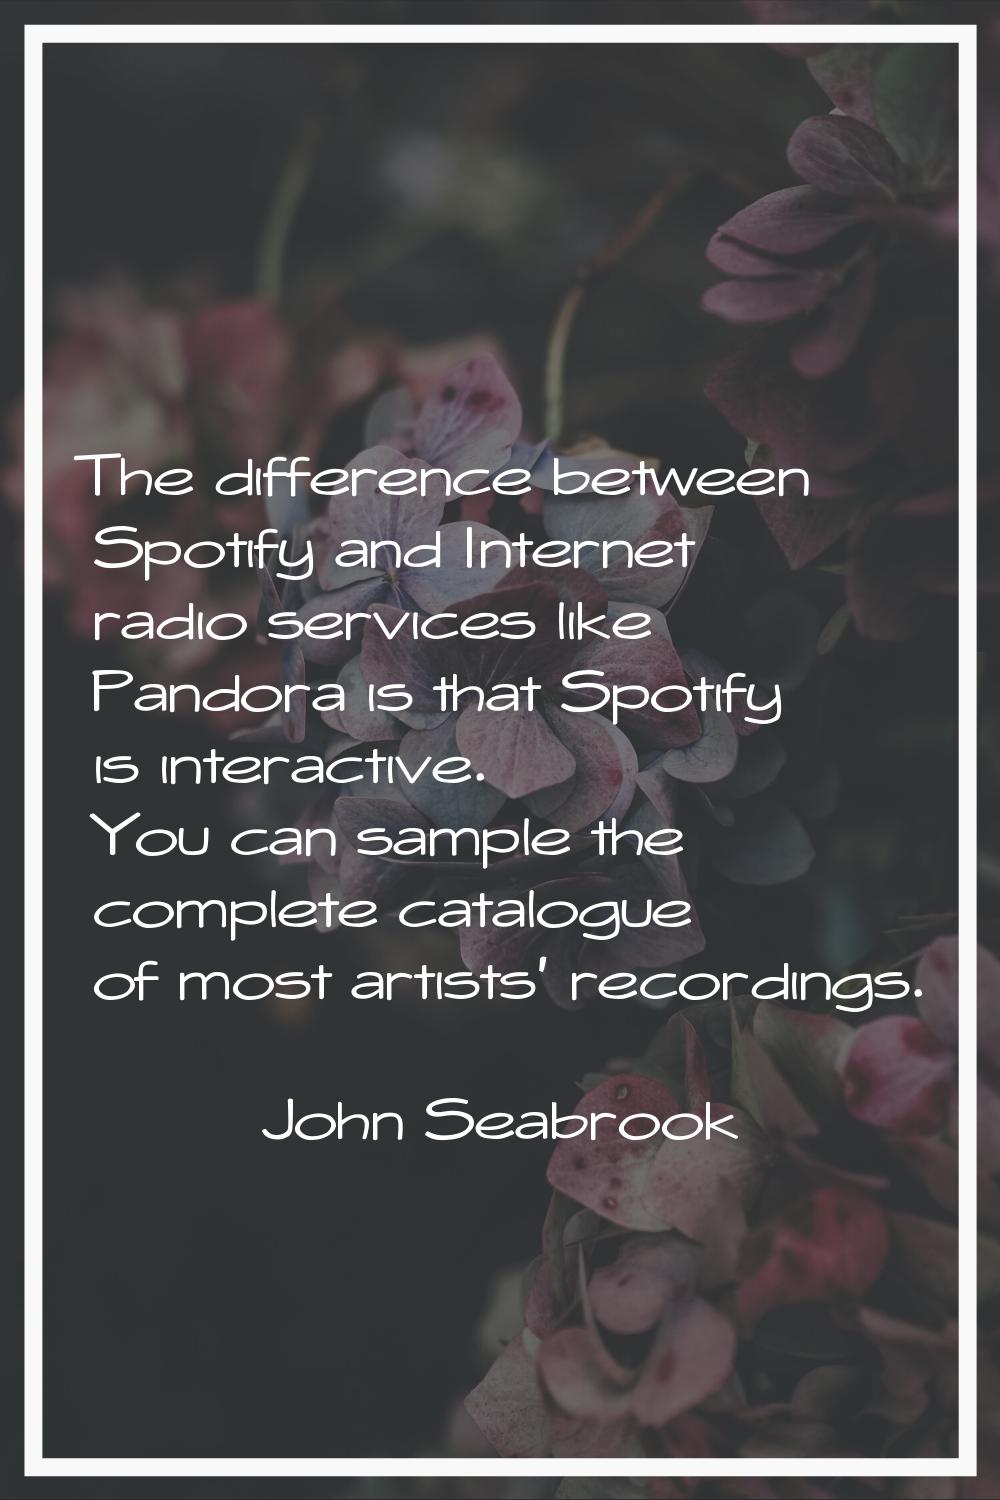 The difference between Spotify and Internet radio services like Pandora is that Spotify is interact